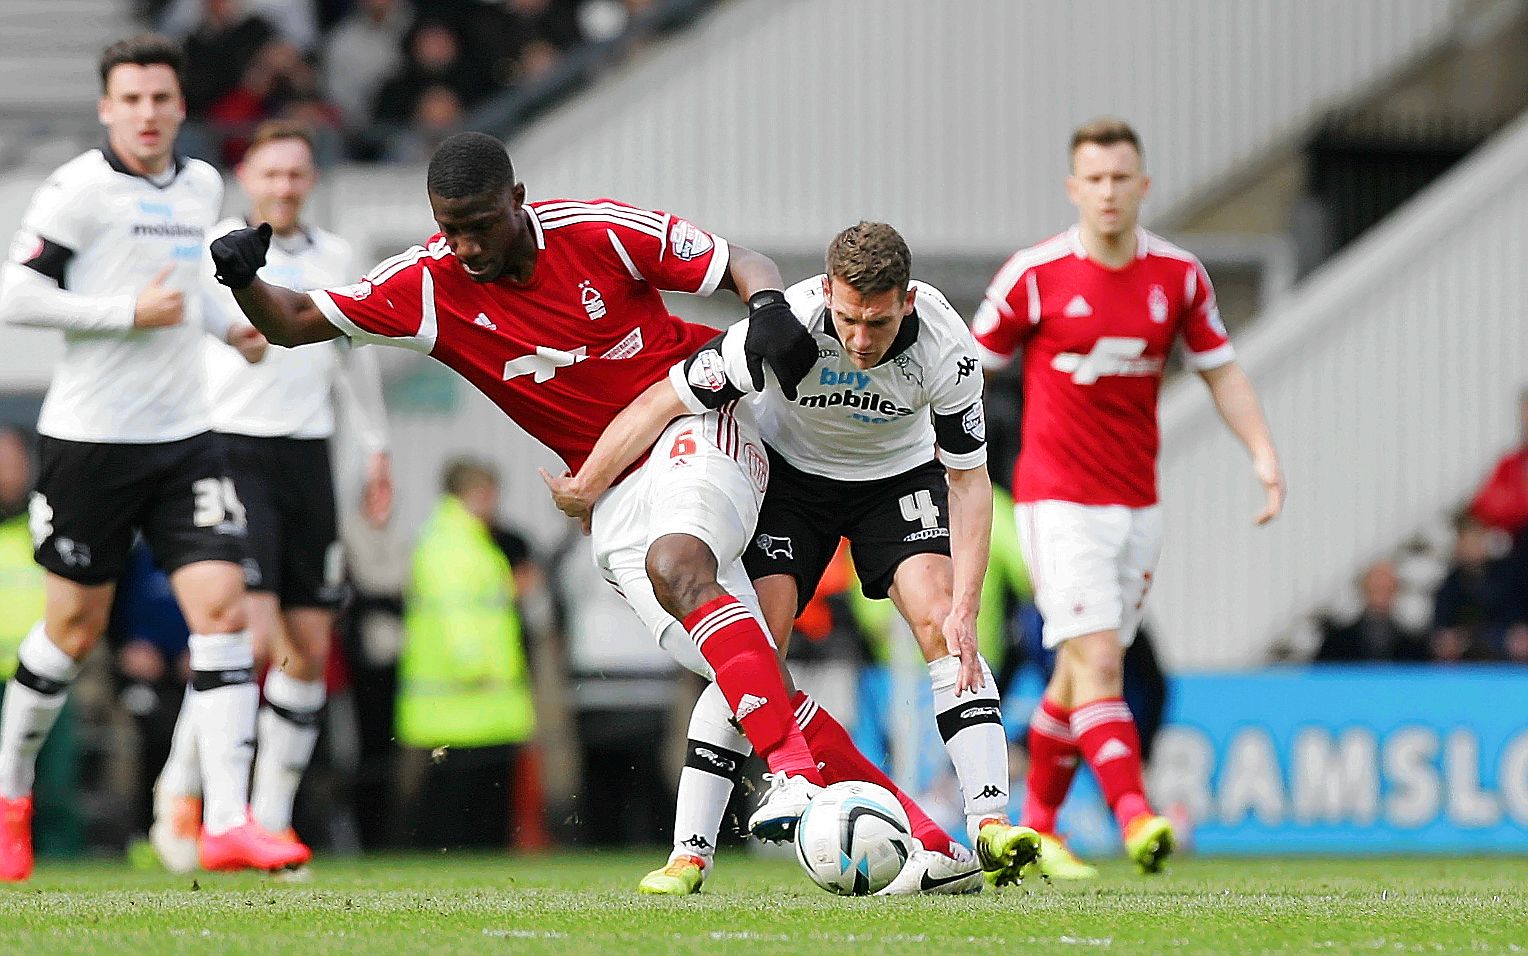 Football - Derby County v Nottingham Forest - Sky Bet Football League Championship - iPro Stadium - 22/3/14 
Nottingham Forest's Guy Moussi (L) in action with Derby's Craig Bryson 
Mandatory Credit: Action Images / David Field  
Livepic 
EDITORIAL USE ONLY. No use with unauthorized audio, video, data, fixture lists, club/league logos or 